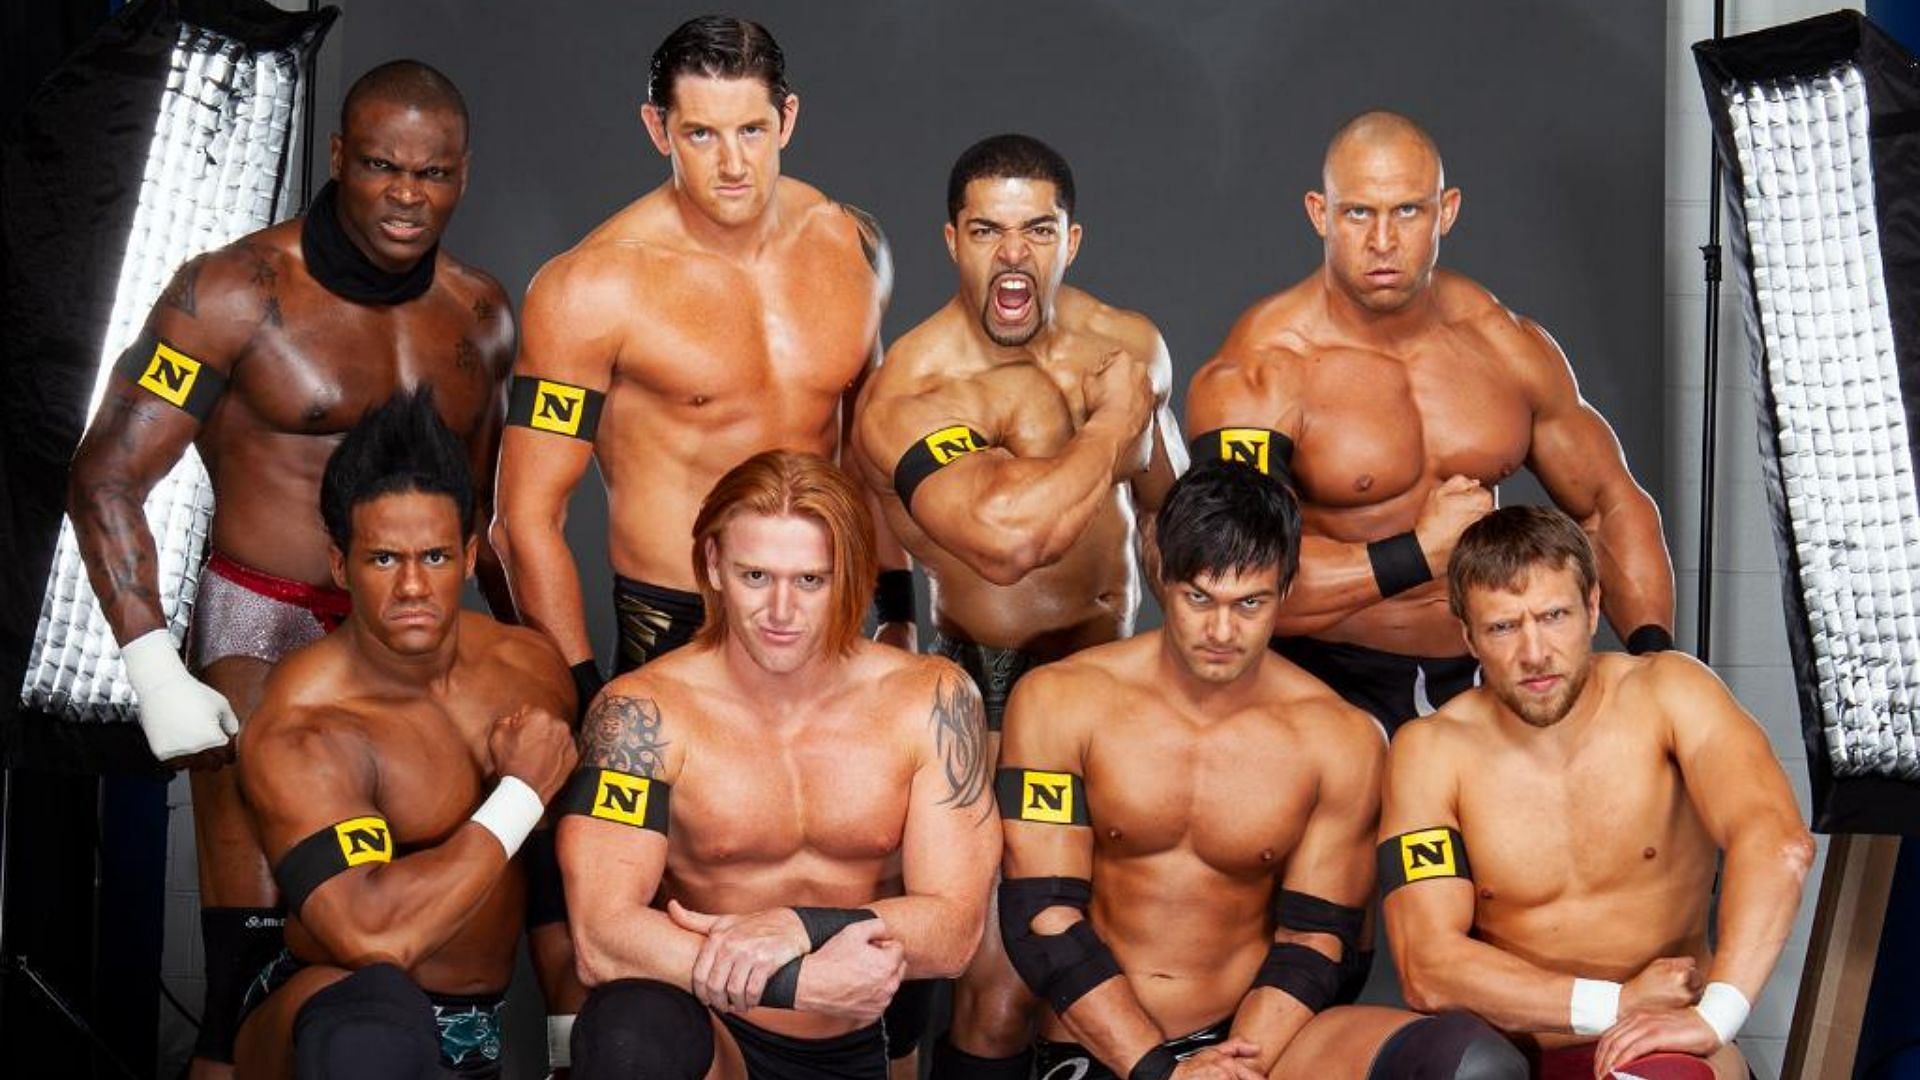 The Nexus debuted on WWE television in 2010